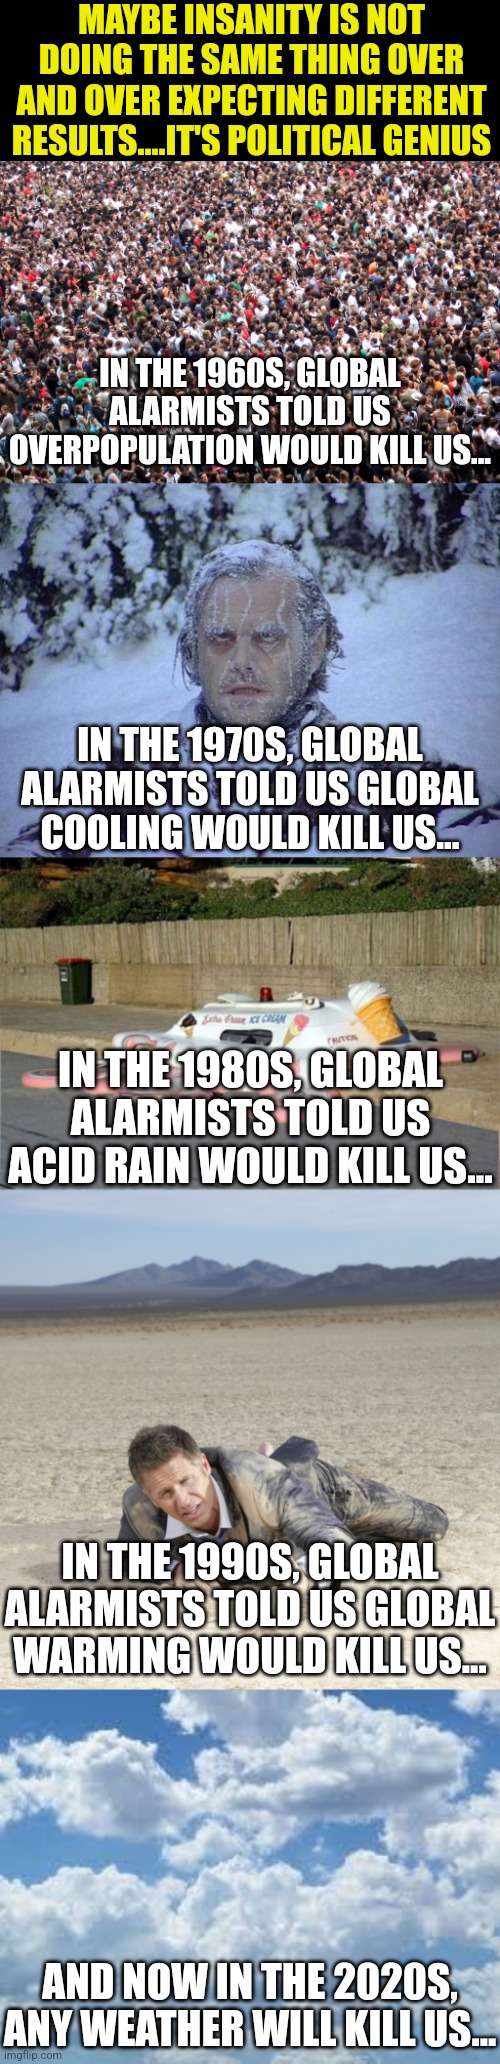 I can't wait to see what will be after us in the 2030s. Wind? Maybe killer dust? | MAYBE INSANITY IS NOT DOING THE SAME THING OVER AND OVER EXPECTING DIFFERENT RESULTS....IT'S POLITICAL GENIUS; IN THE 1960S, GLOBAL ALARMISTS TOLD US OVERPOPULATION WOULD KILL US... IN THE 1970S, GLOBAL ALARMISTS TOLD US GLOBAL COOLING WOULD KILL US... IN THE 1980S, GLOBAL ALARMISTS TOLD US ACID RAIN WOULD KILL US... IN THE 1990S, GLOBAL ALARMISTS TOLD US GLOBAL WARMING WOULD KILL US... AND NOW IN THE 2020S, ANY WEATHER WILL KILL US... | image tagged in clouds,stupid liberals,climate change,democrats,insanity,liberal hypocrisy | made w/ Imgflip meme maker